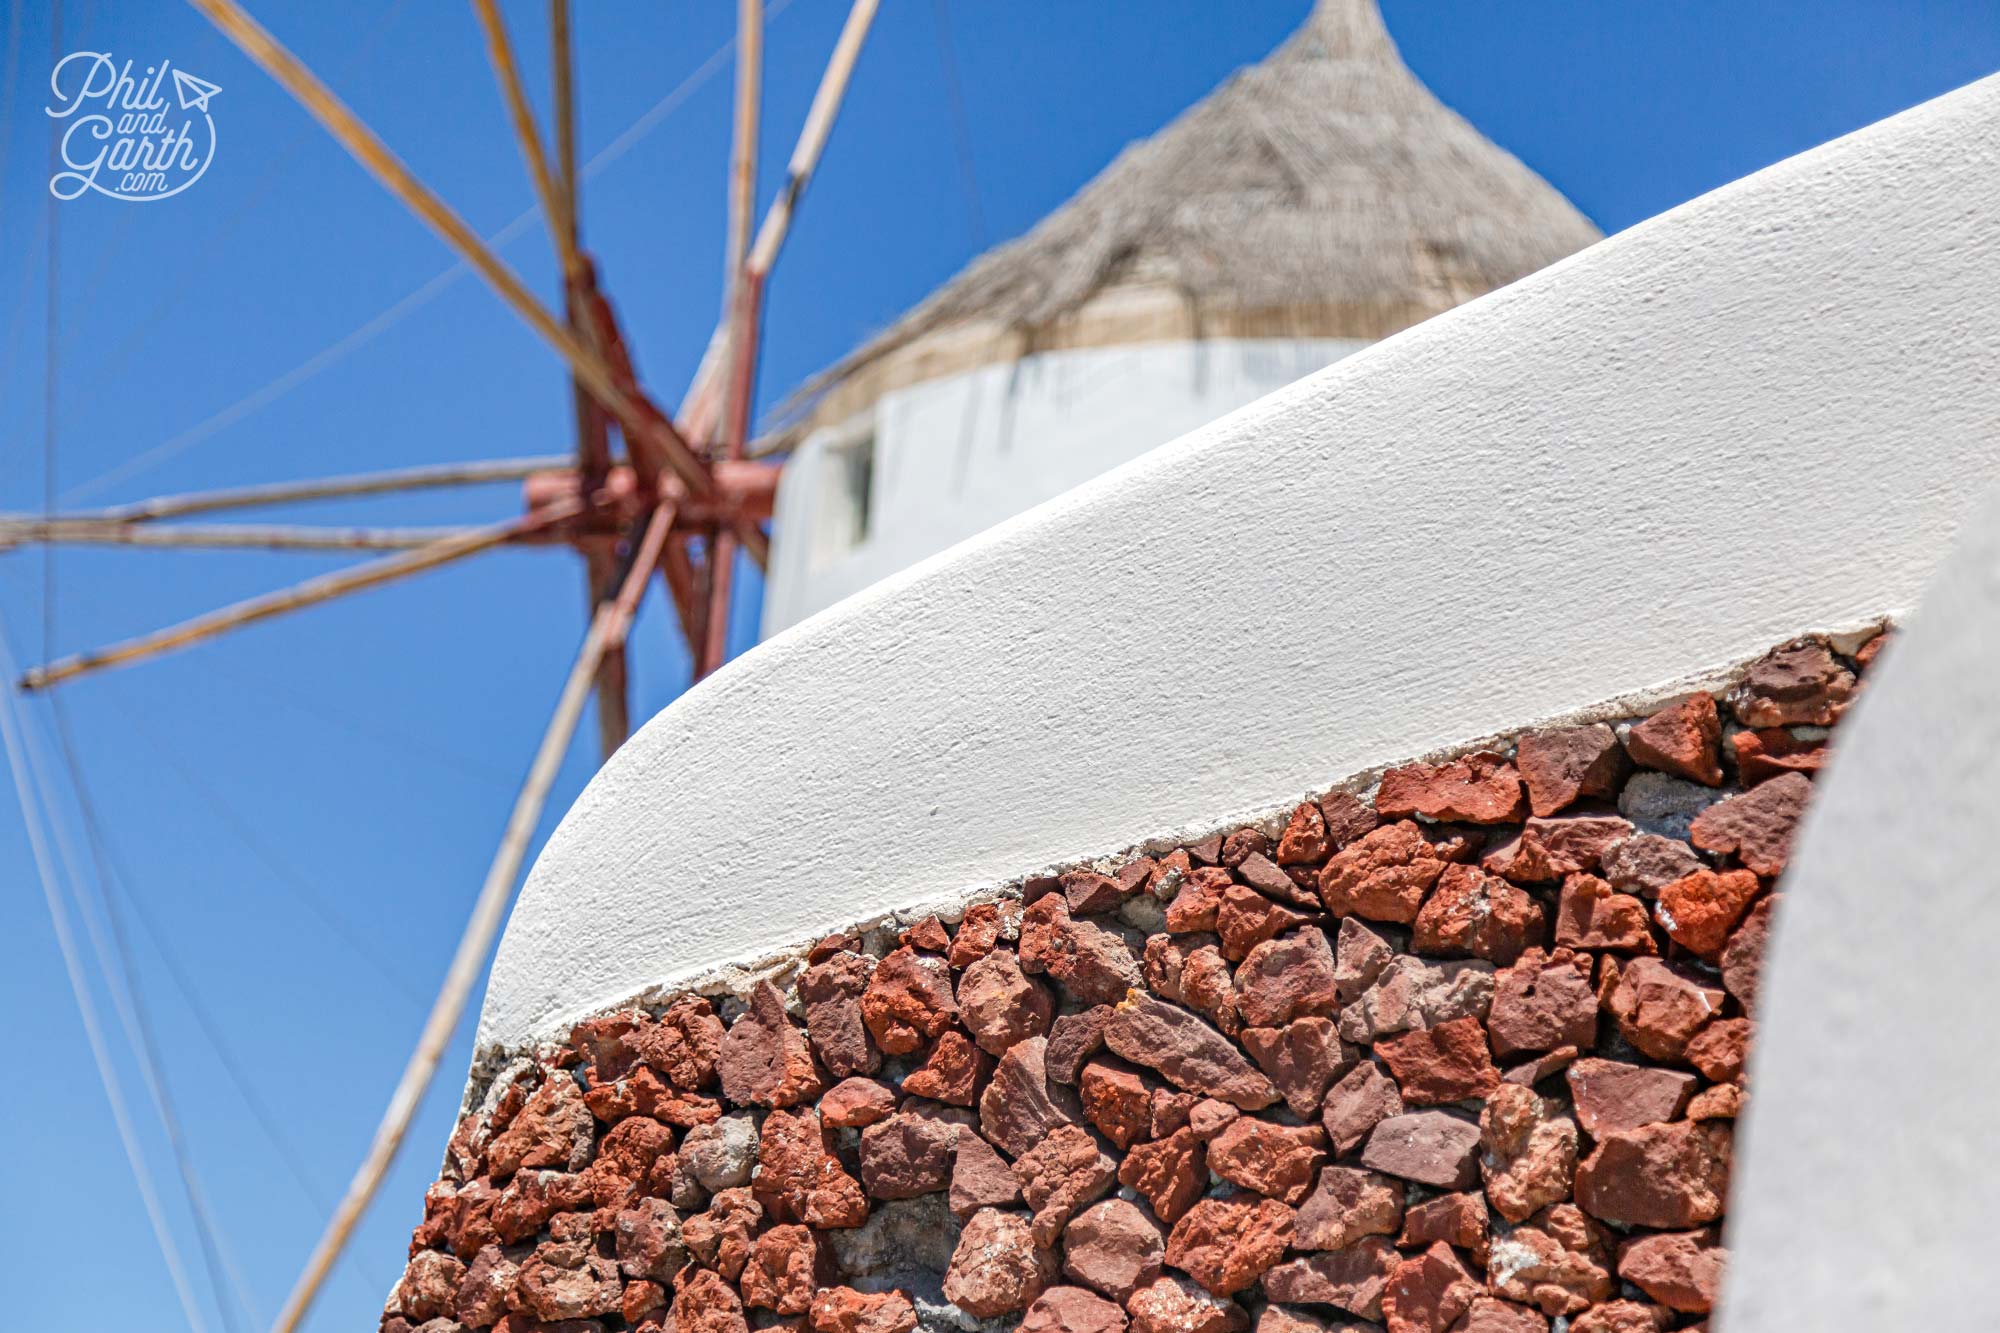 So many textures, Oia is incredibly picturesque